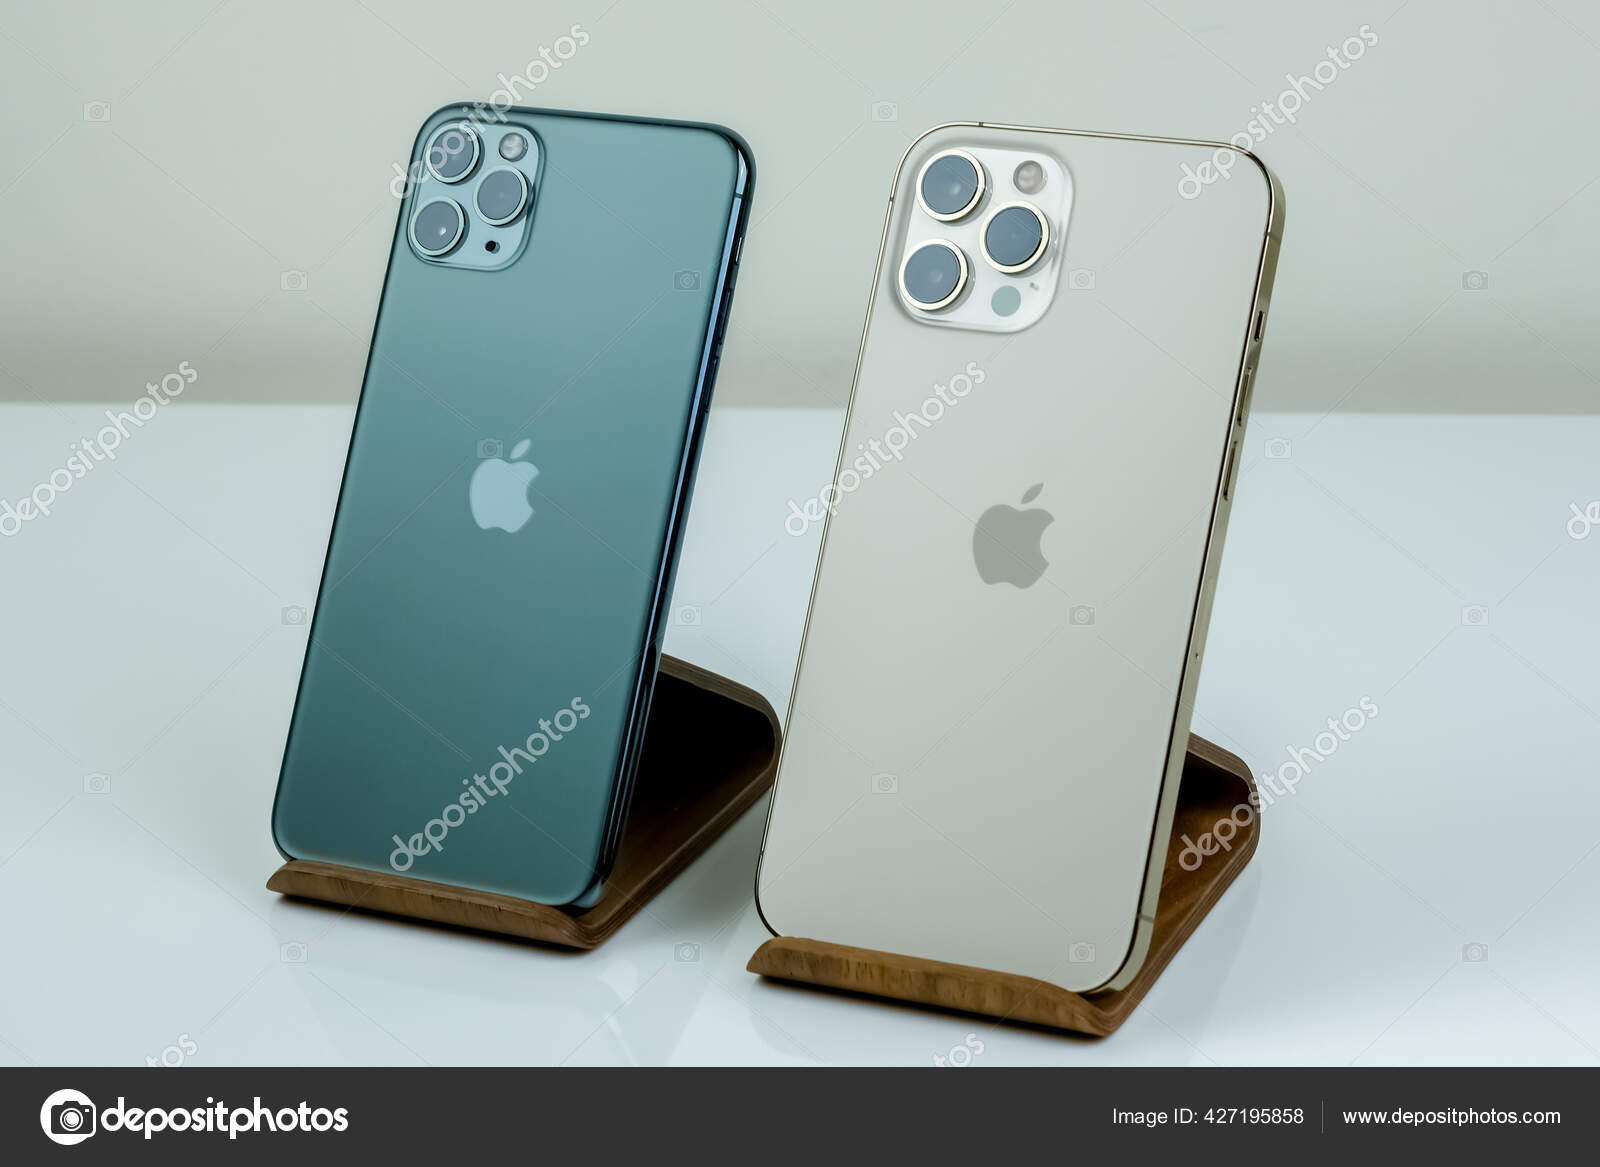 Iphone Pro Max Gold Next Iphone Pro Max Midnight Green Stock Editorial Photo C Nycruss